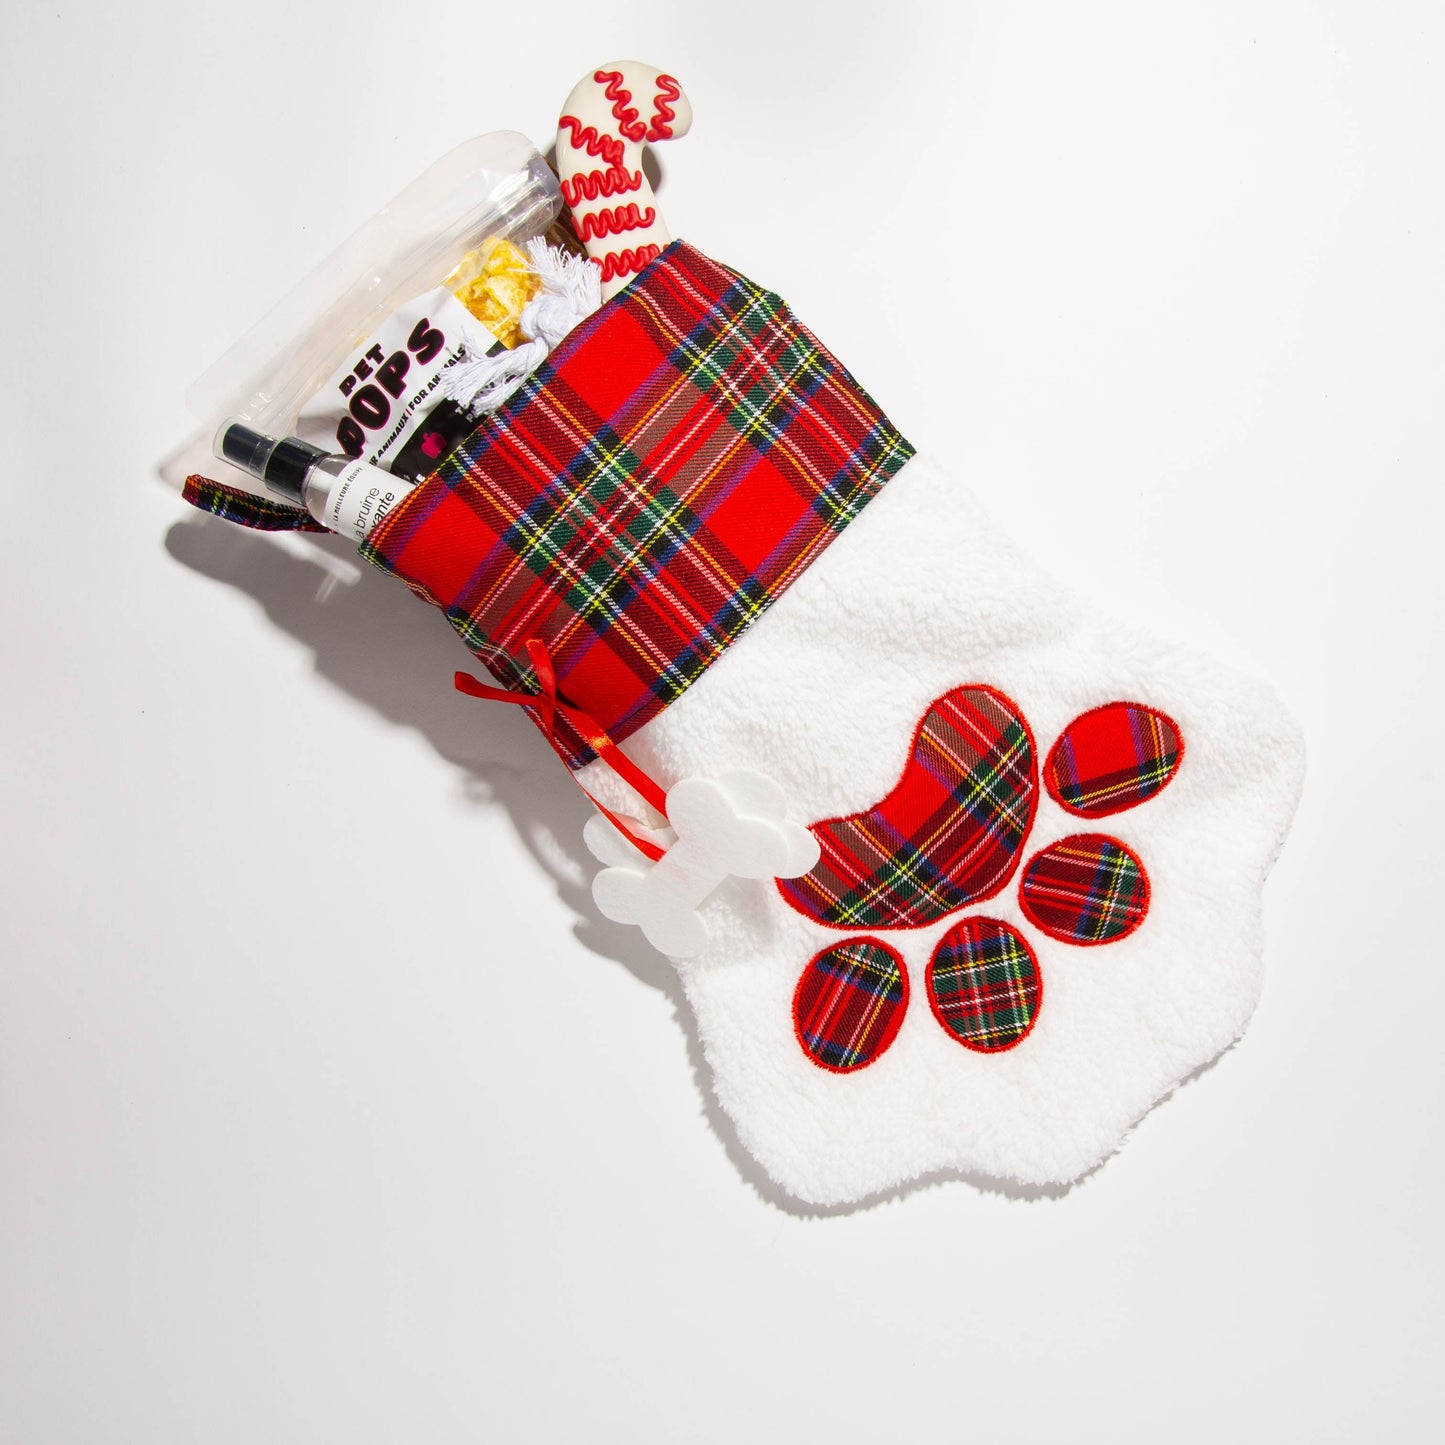 Christmas stockings for dogs